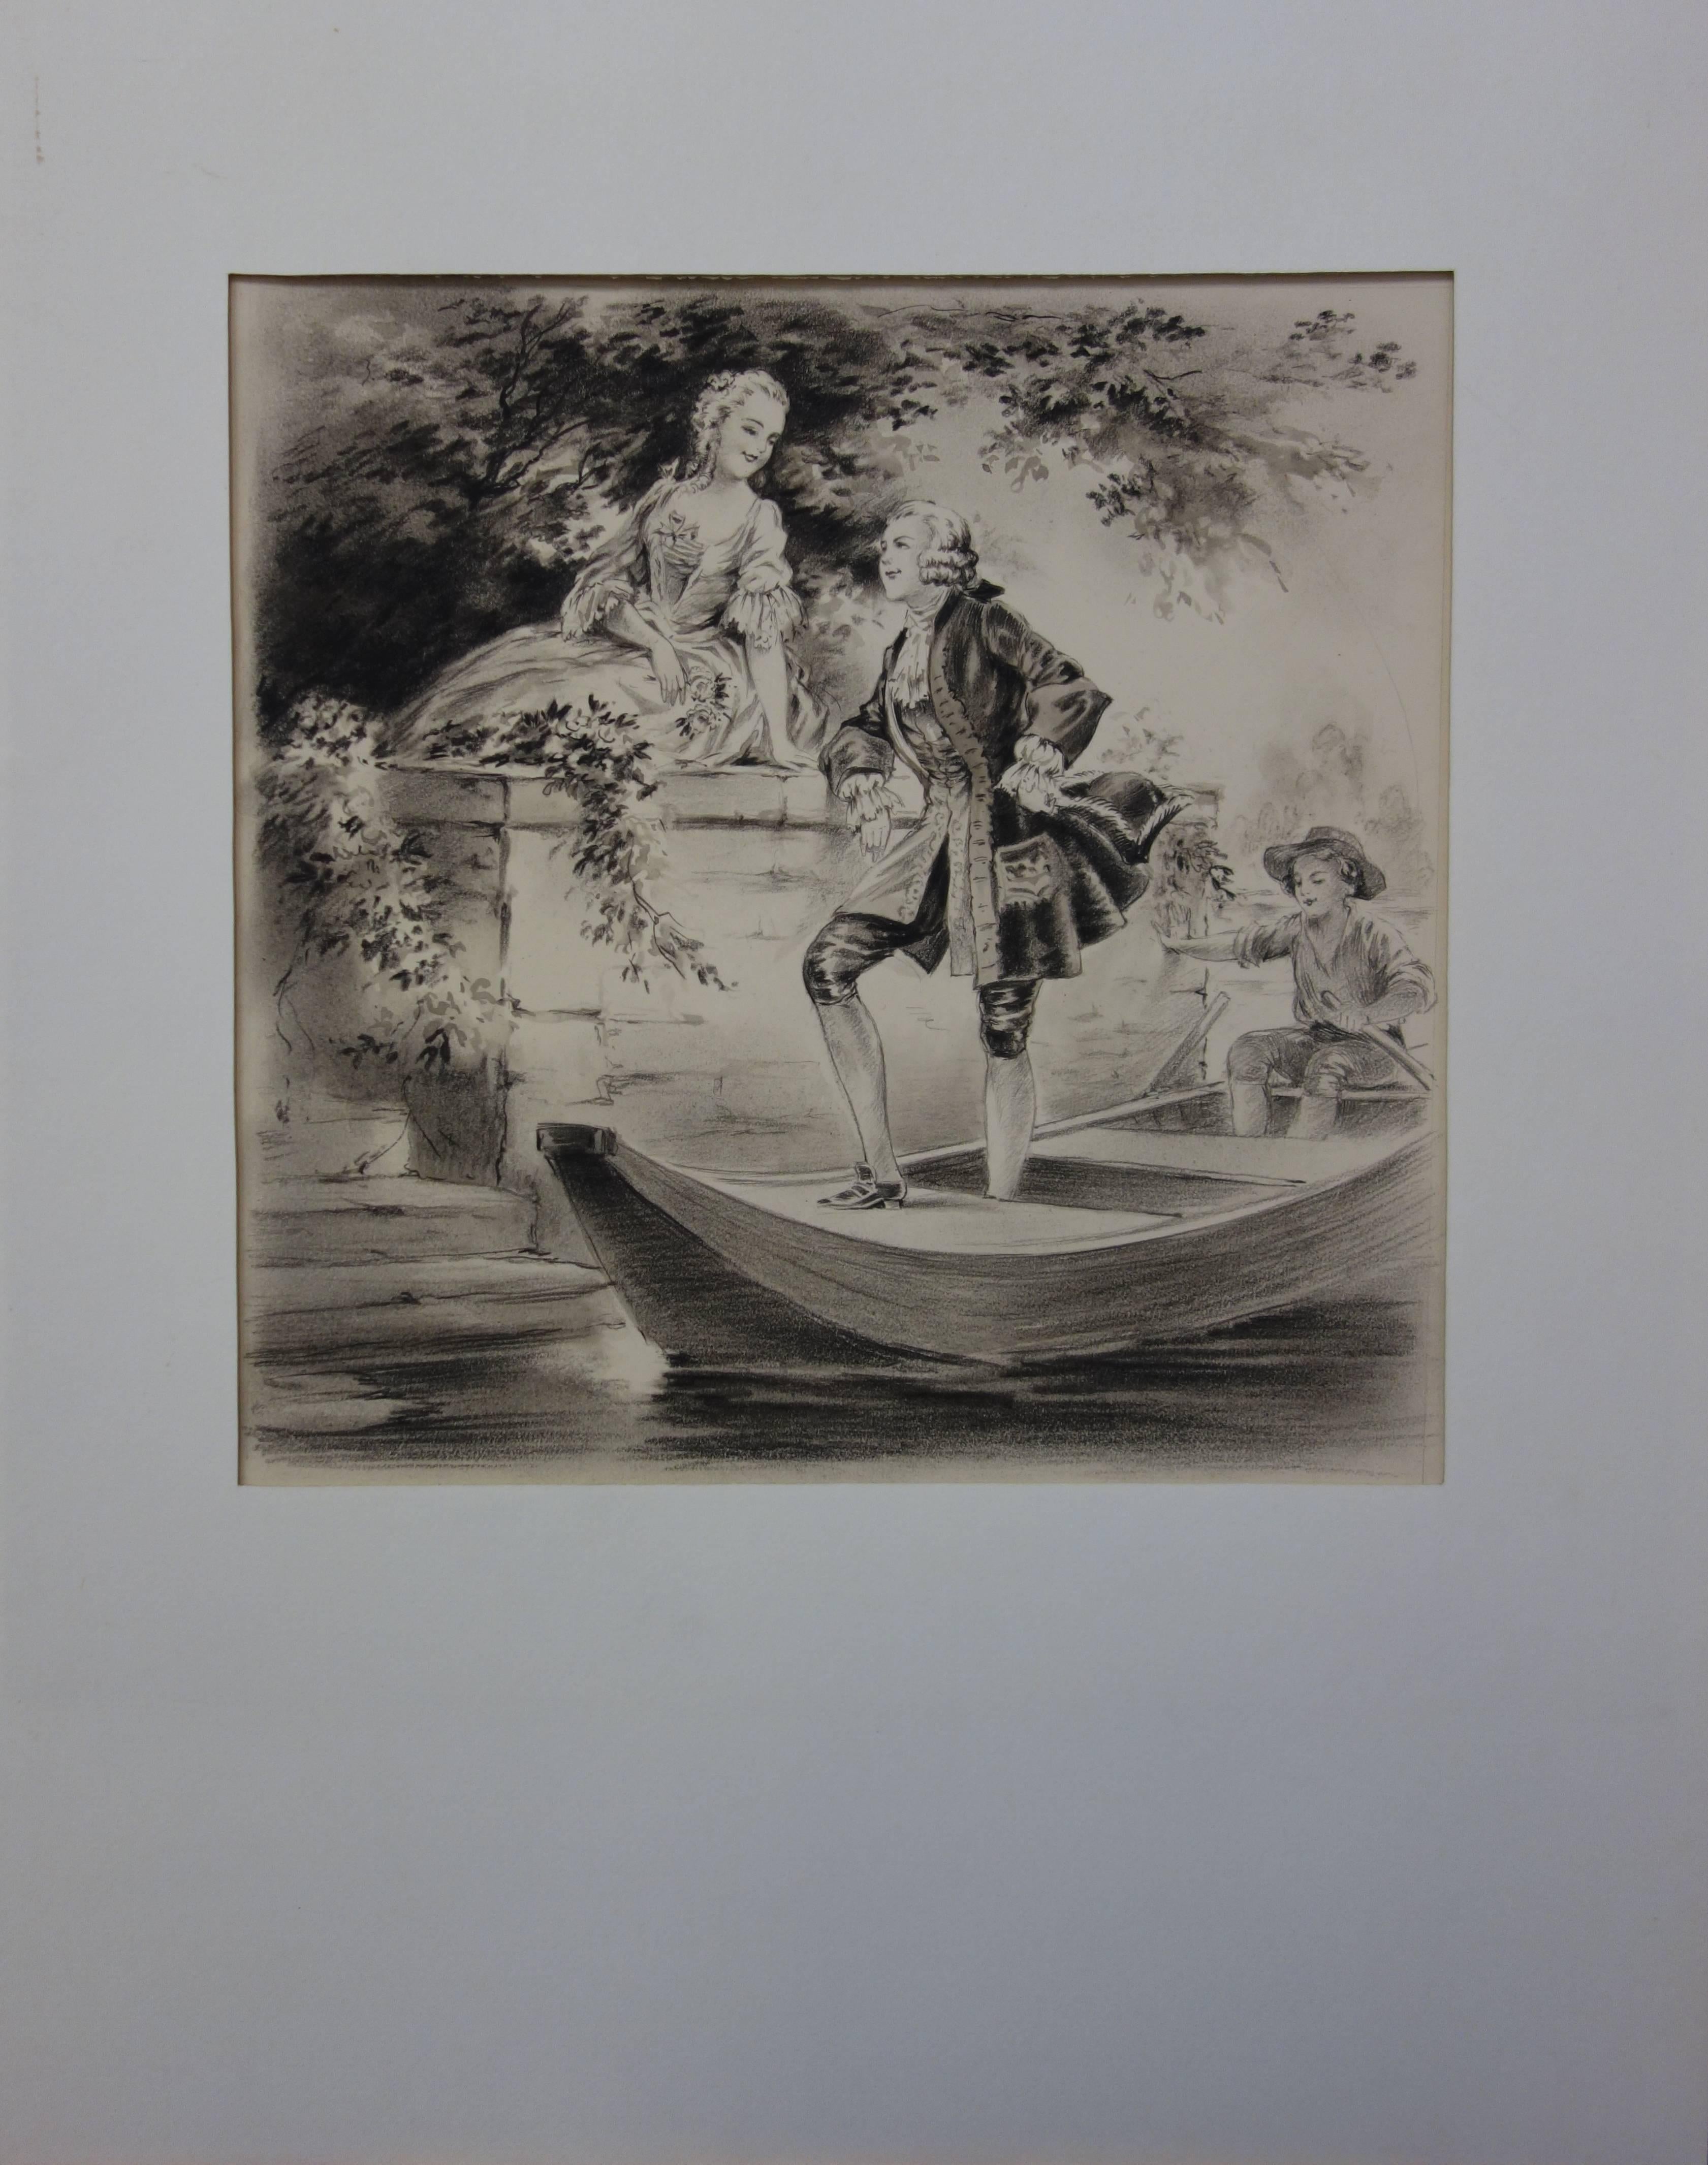 Lover Arriving on a Boat - Original handsigned drawing - 1931 - Romantic Art by Alfred Renaudin (Naudy)